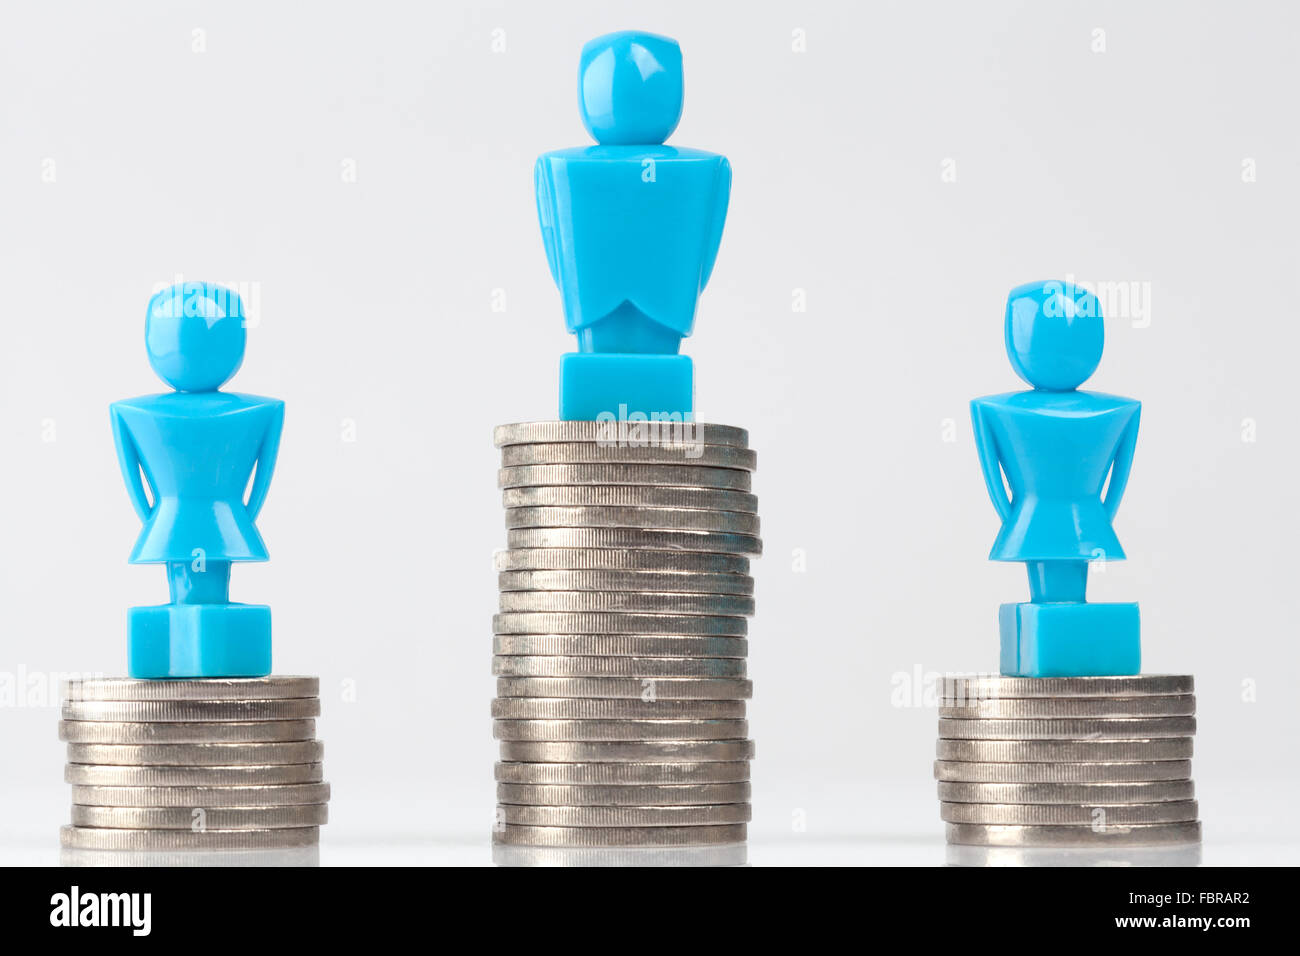 One male and two female figurines standing on piles of coins. Hero look. Income inequality concept. Stock Photo